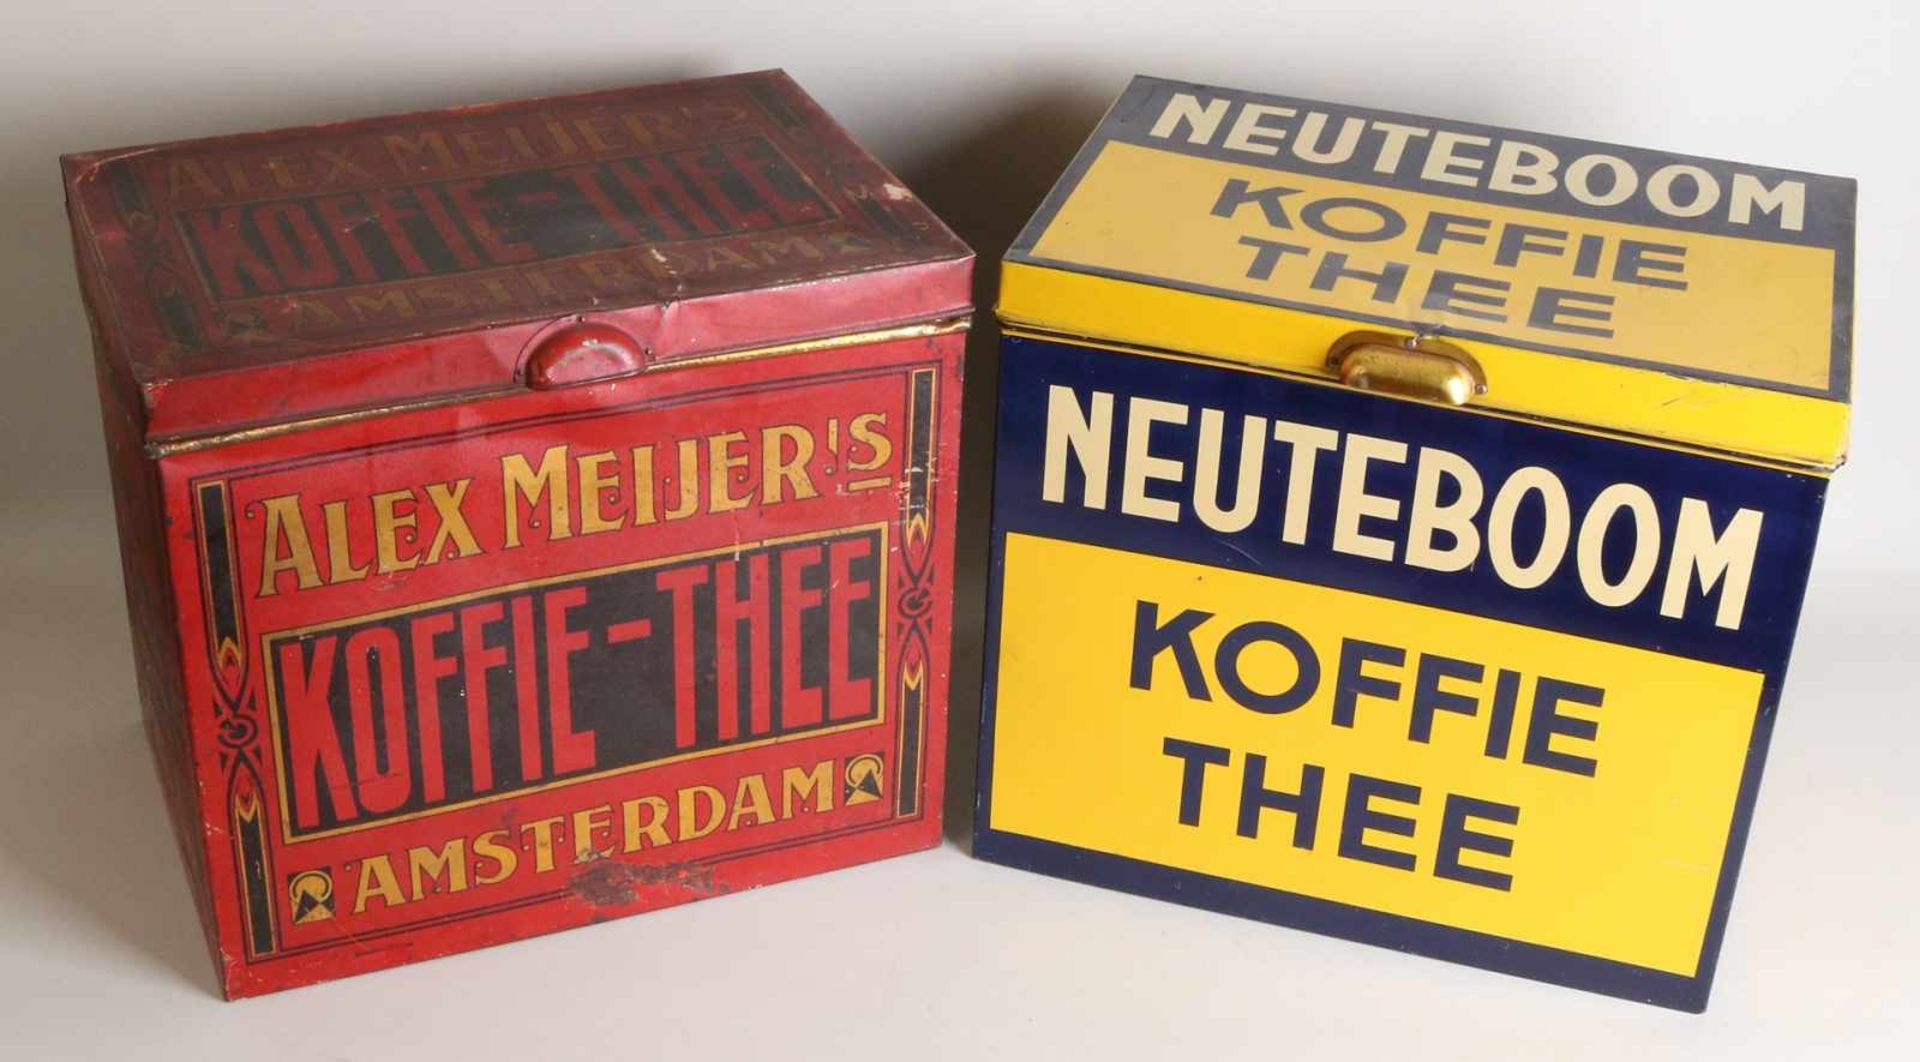 Two large antique grocery stock cans. Consisting of: Neuteboom Coffee-Tea, 1930. Alex Meijer's